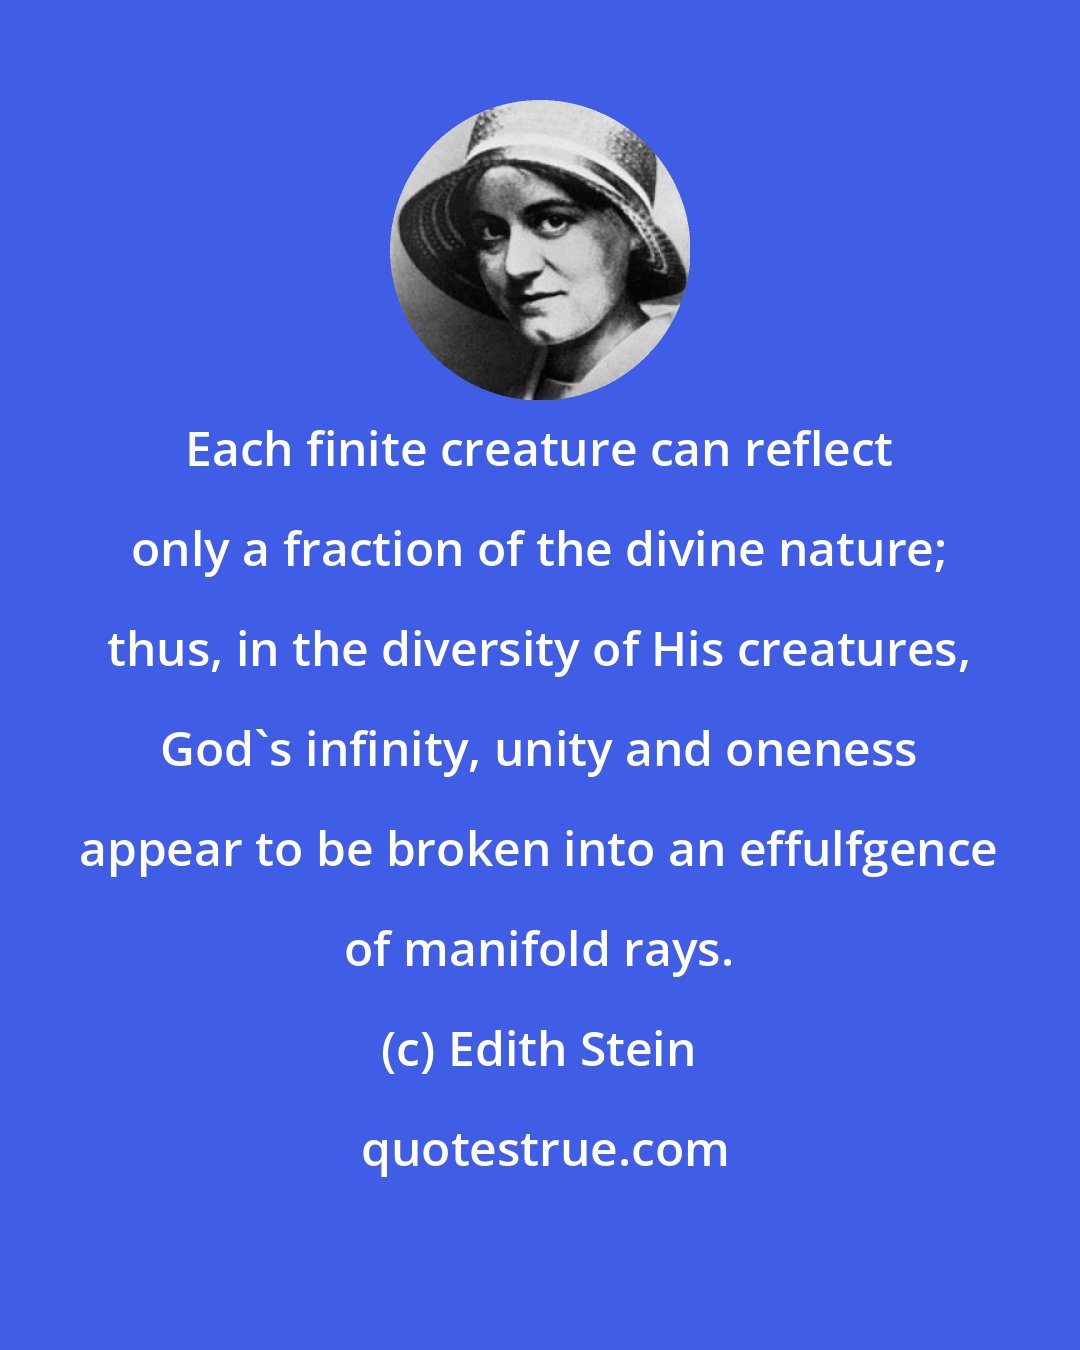 Edith Stein: Each finite creature can reflect only a fraction of the divine nature; thus, in the diversity of His creatures, God's infinity, unity and oneness appear to be broken into an effulfgence of manifold rays.